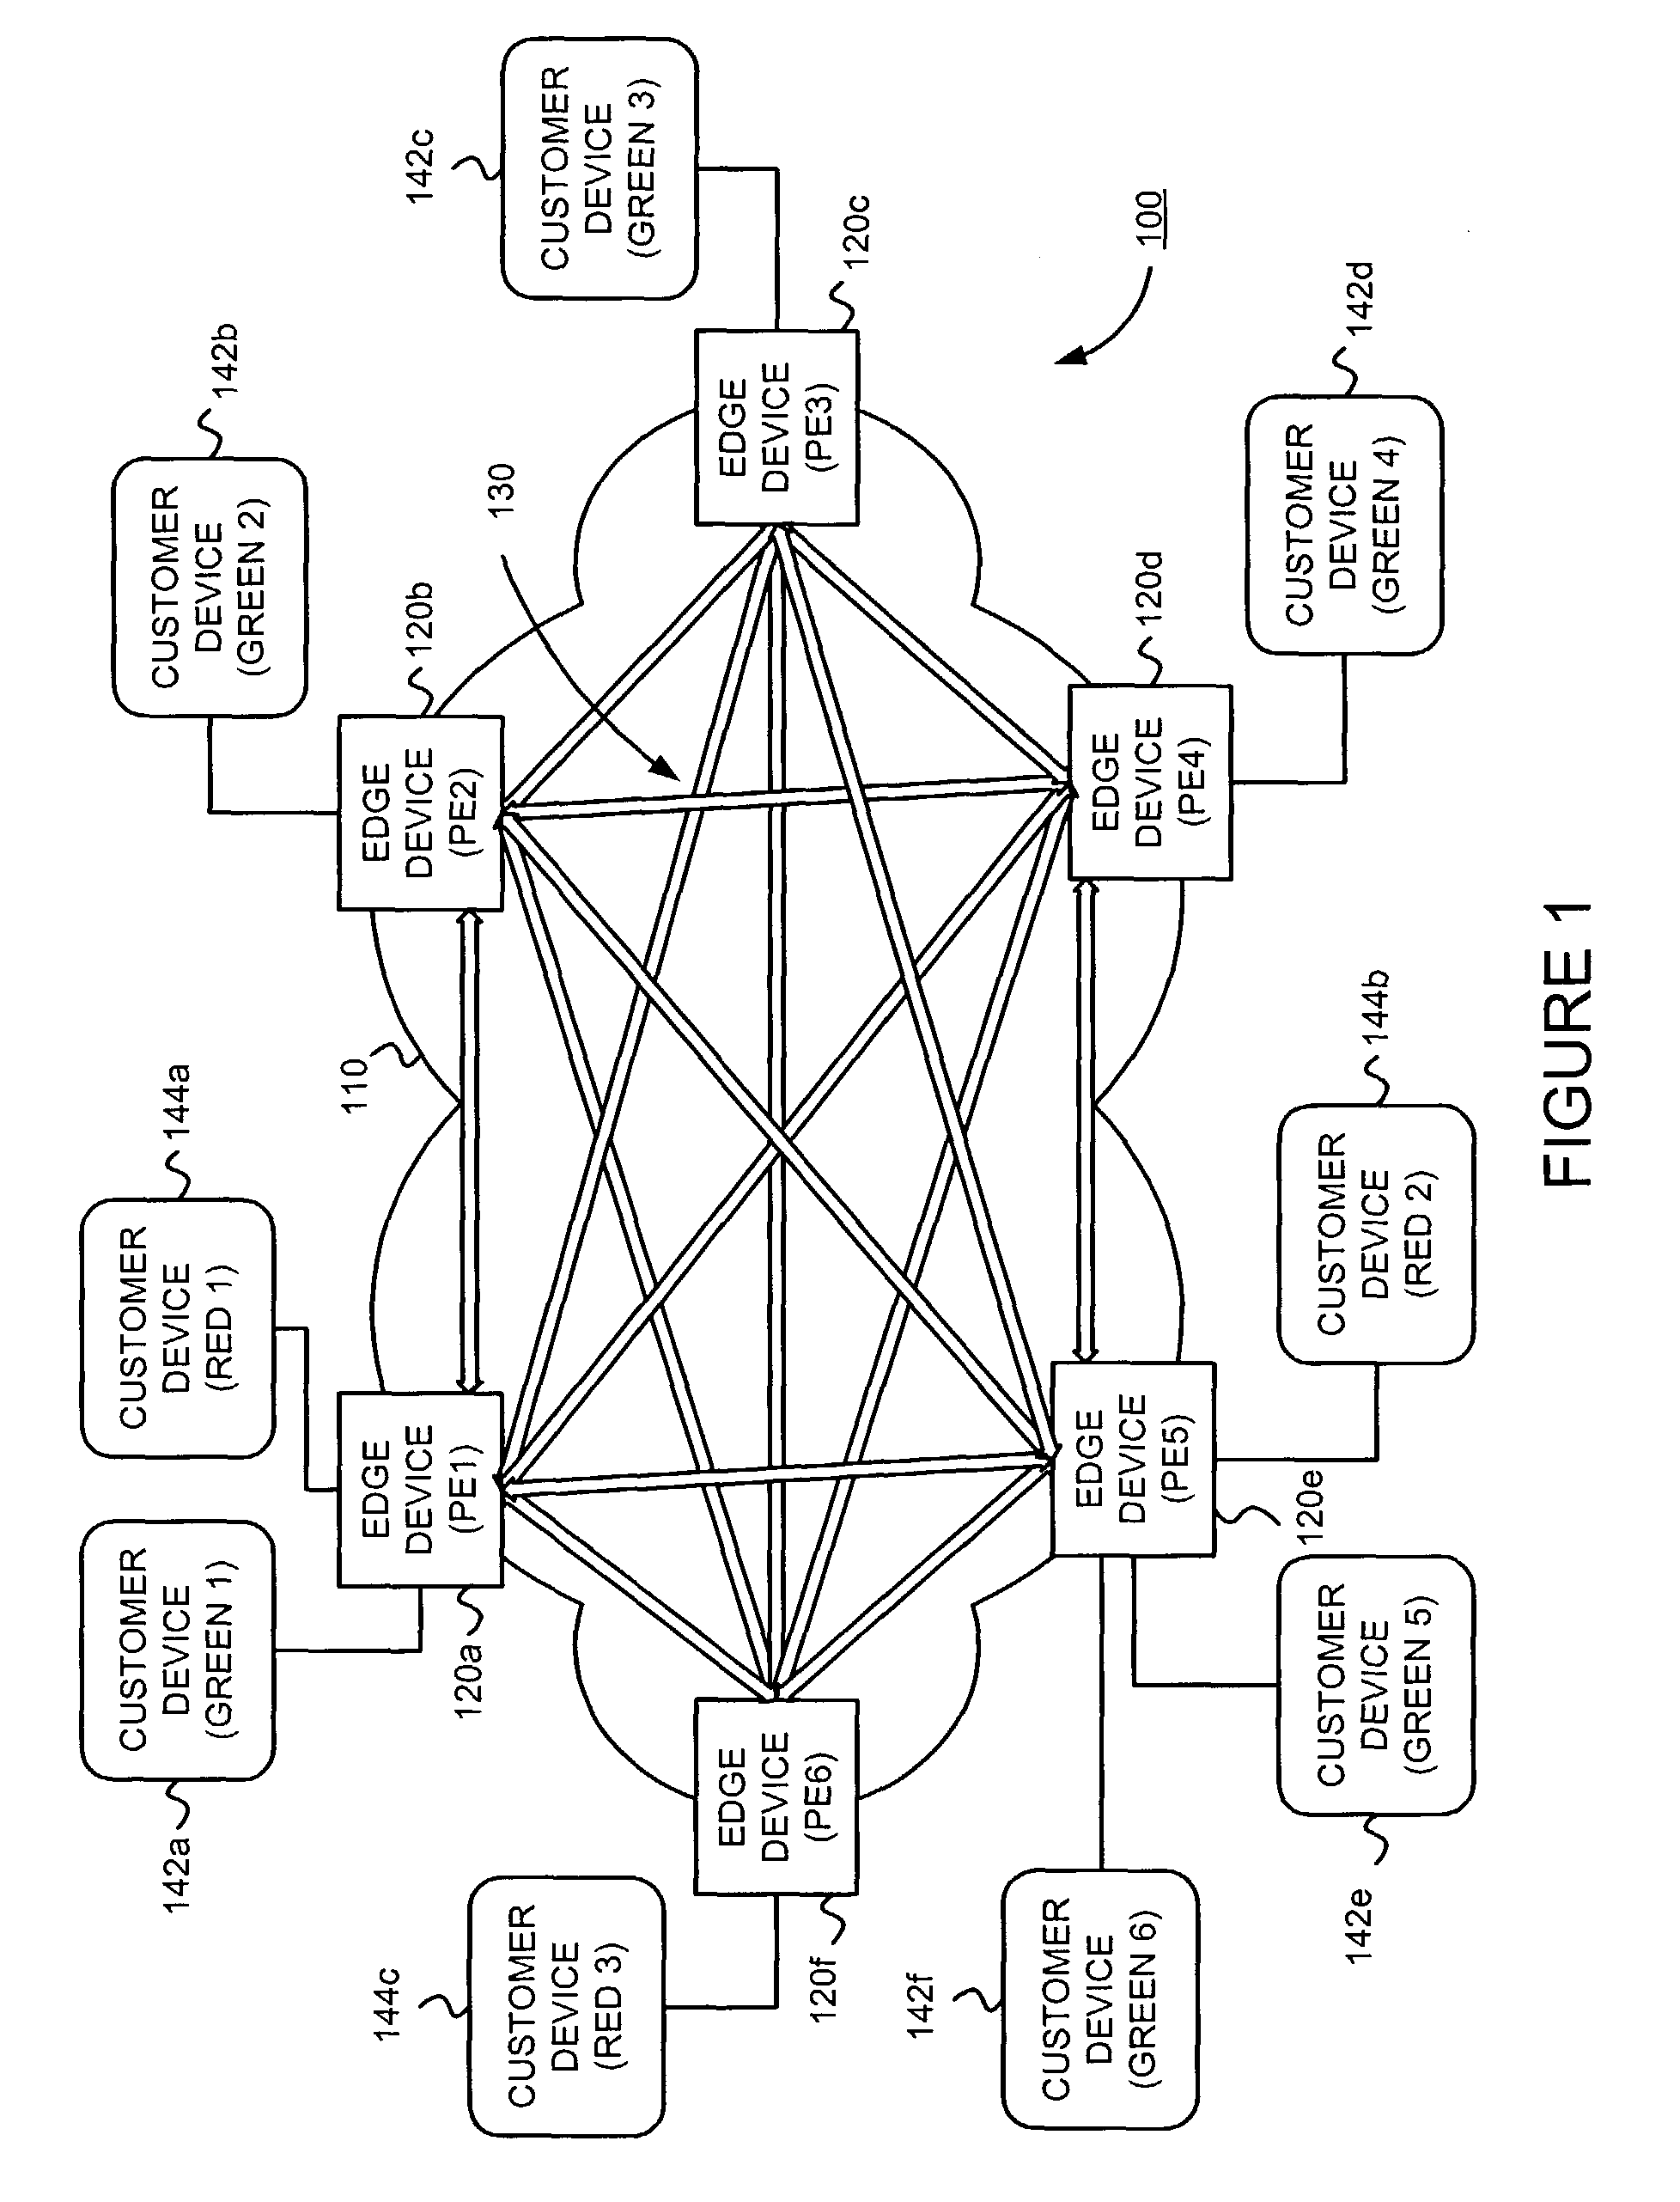 Supporting virtual private networks using a first network topology for forwarding and a subset of the first network topology or a smaller topology for signaling